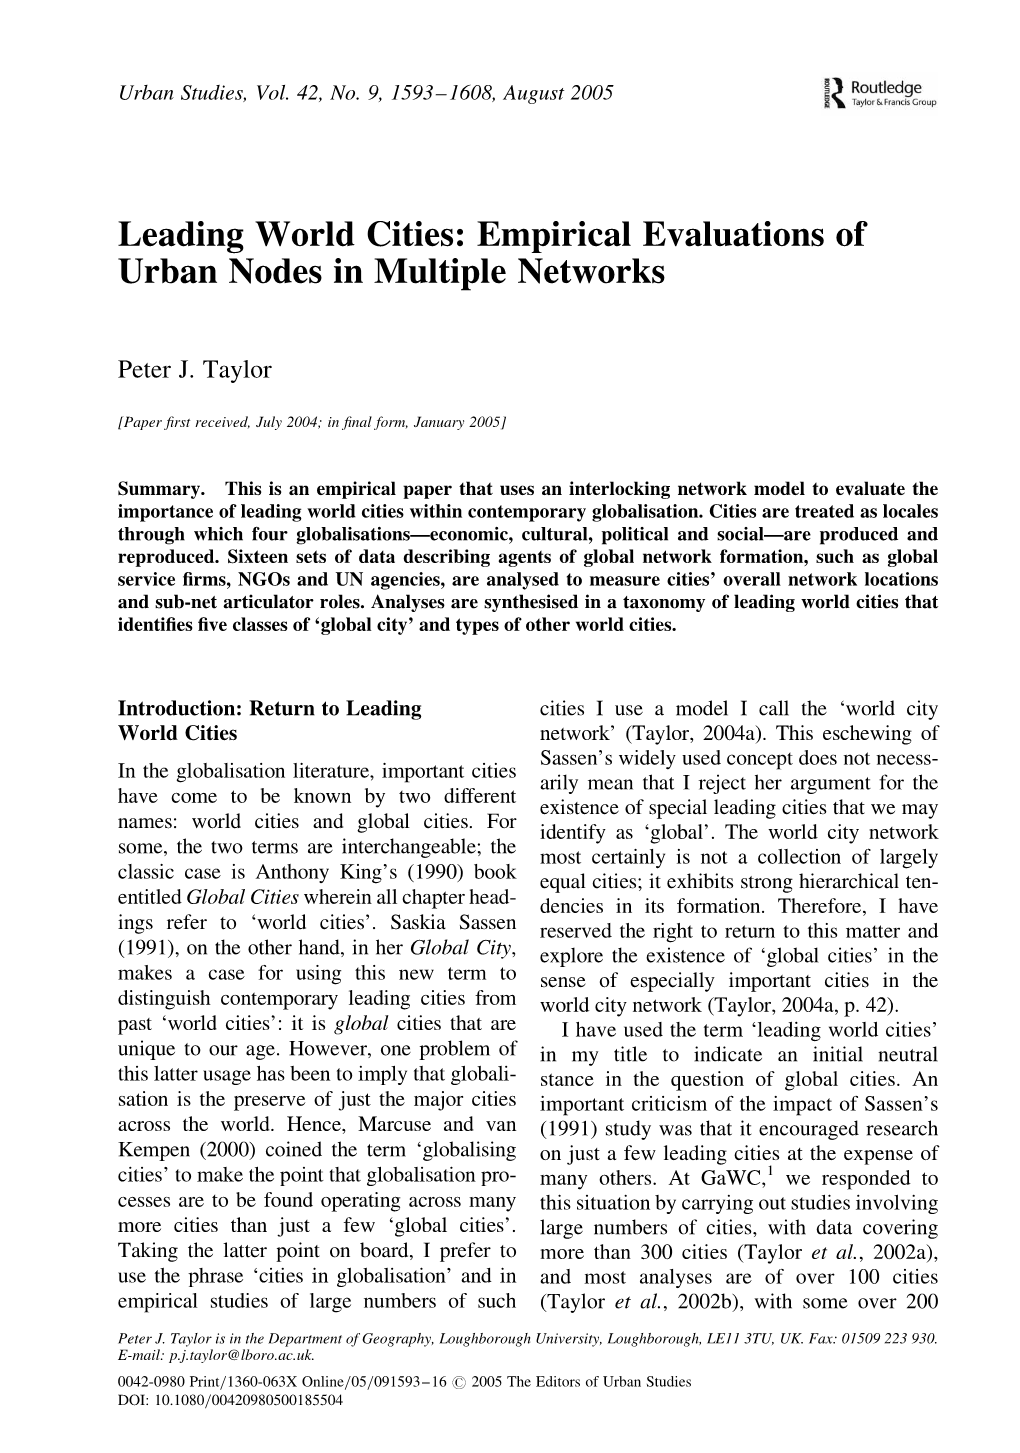 Leading World Cities: Empirical Evaluations of Urban Nodes in Multiple Networks